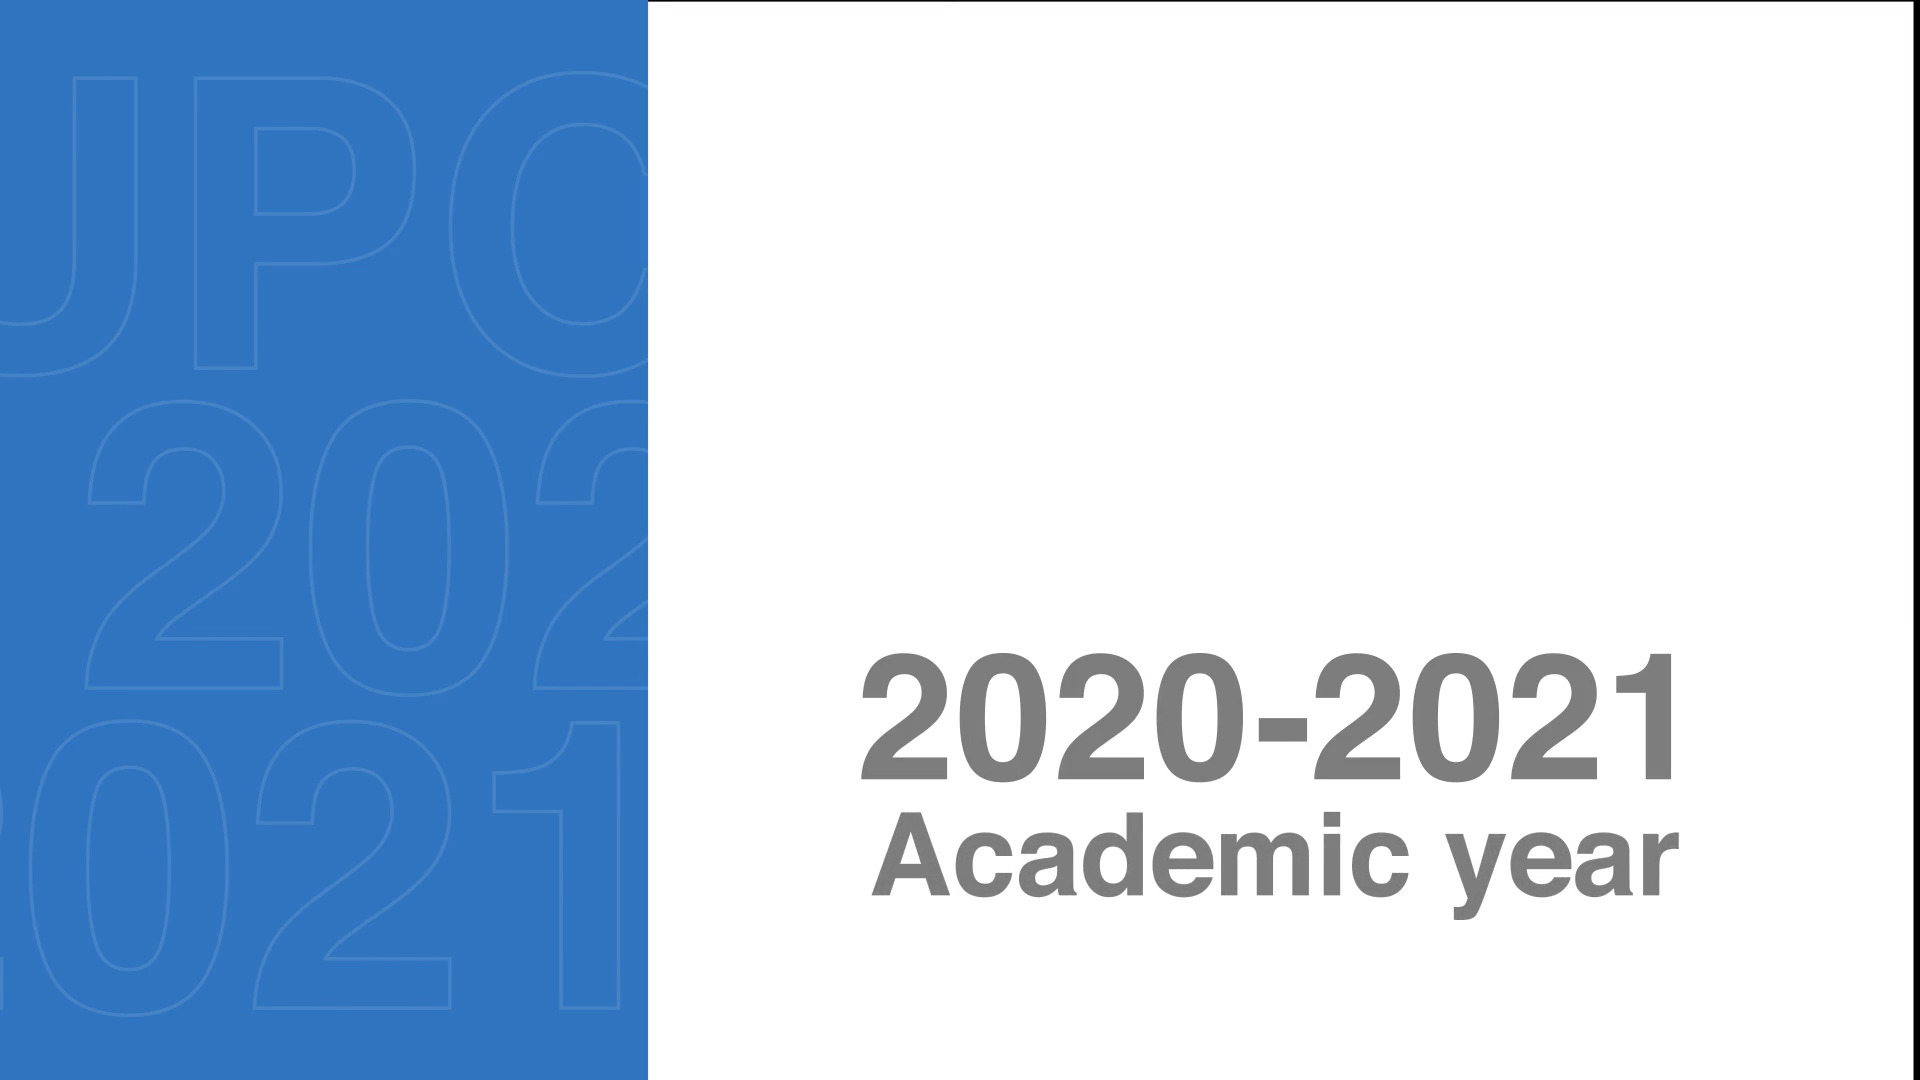 The UPC today, 2021-2022 academic year